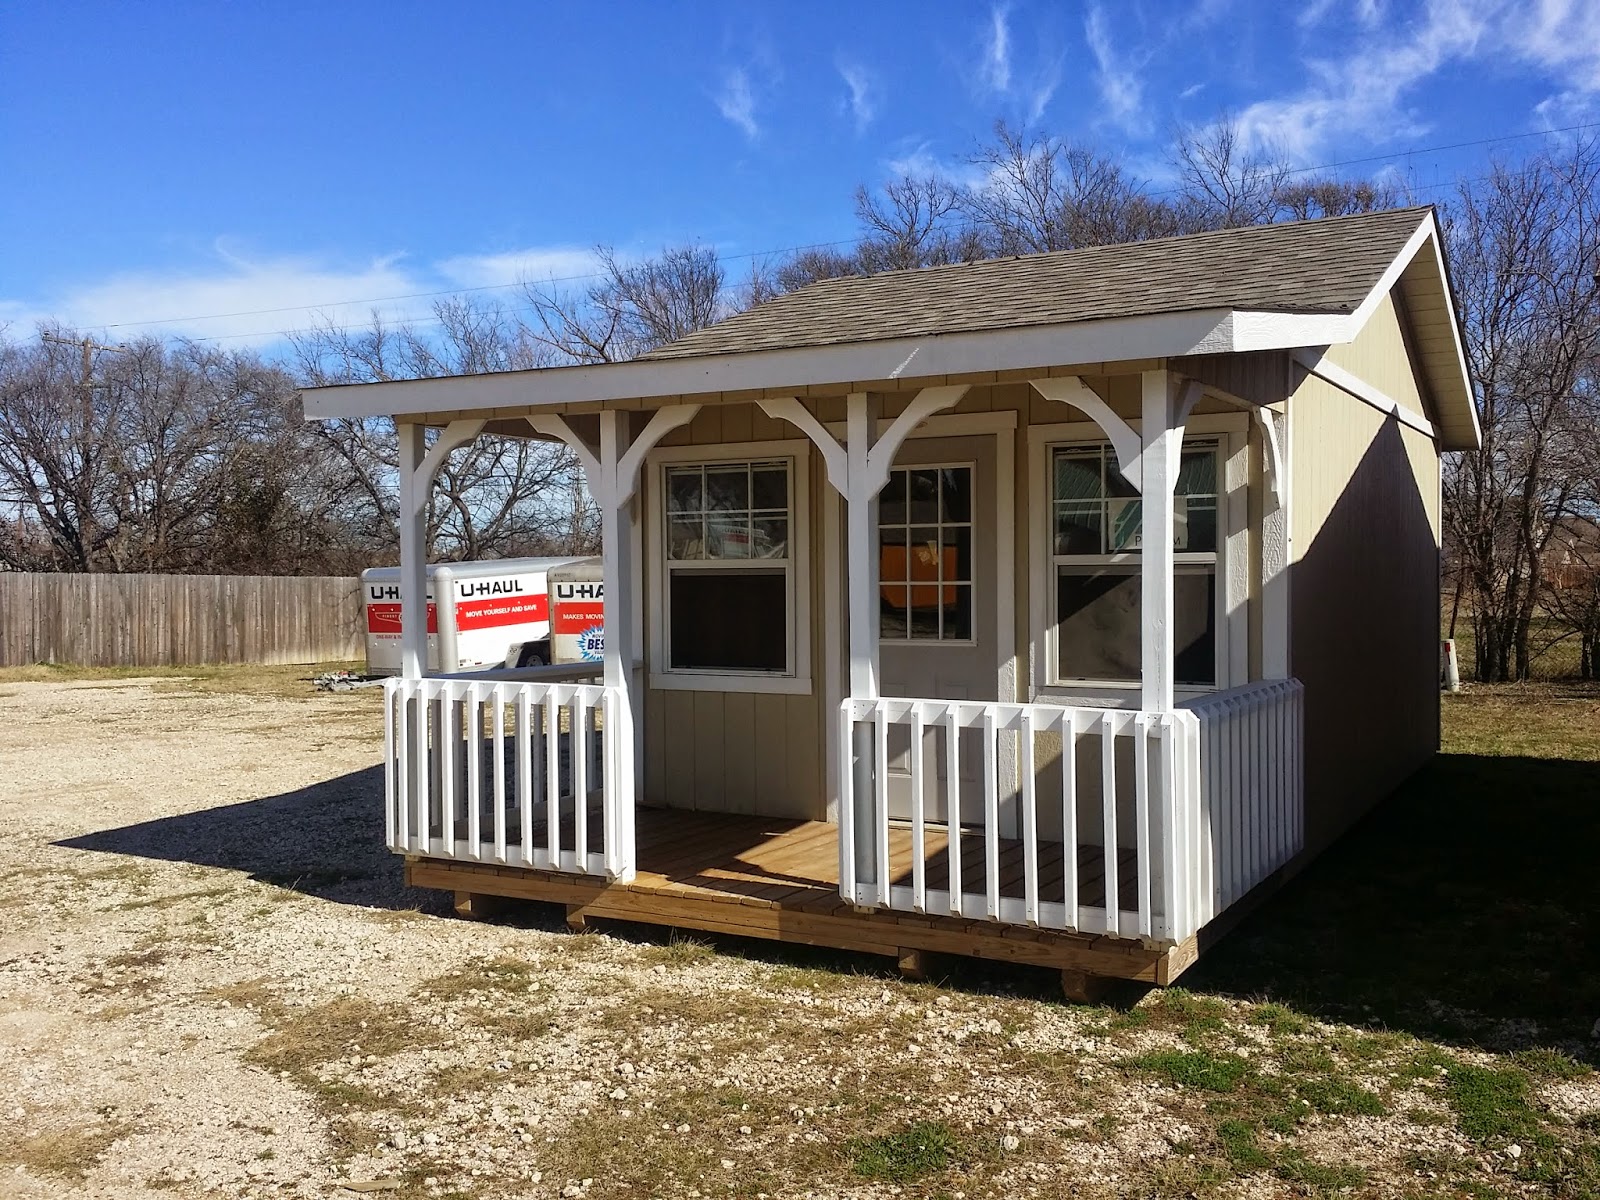 ... huge discount. Portable building, office, shed, storage, or cabin